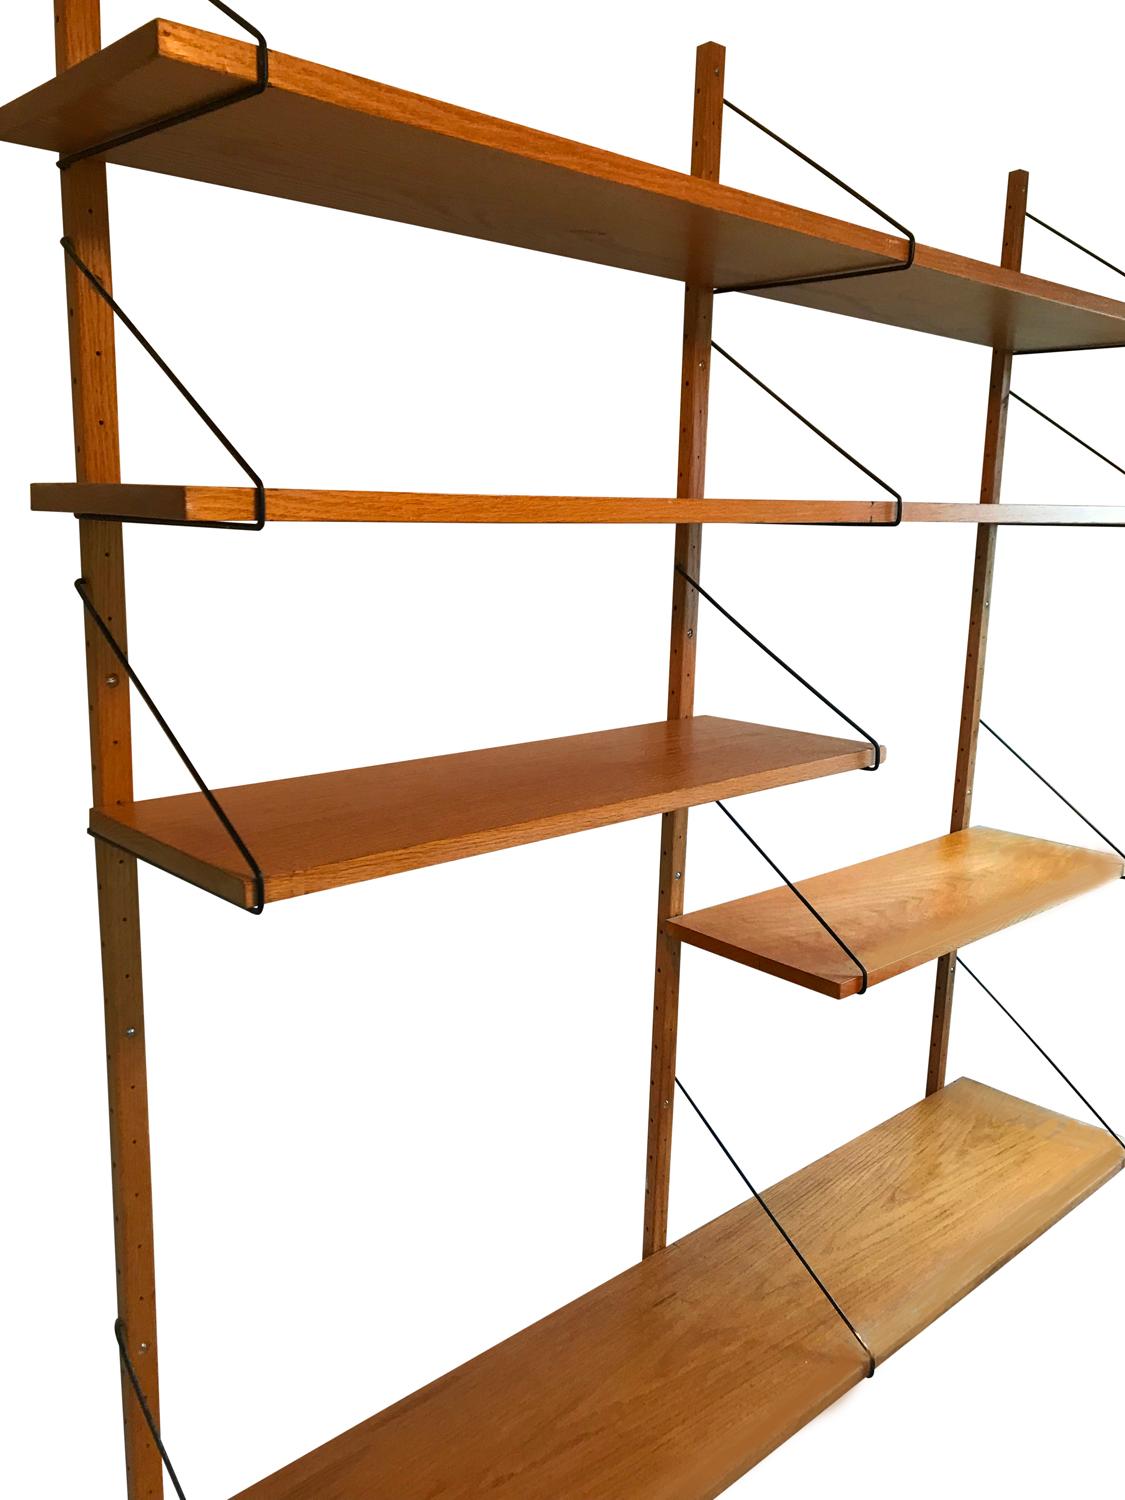 A handsome midcentury shelving unit that boasts simple design. It features oakwood components with black metal hanging hardware.